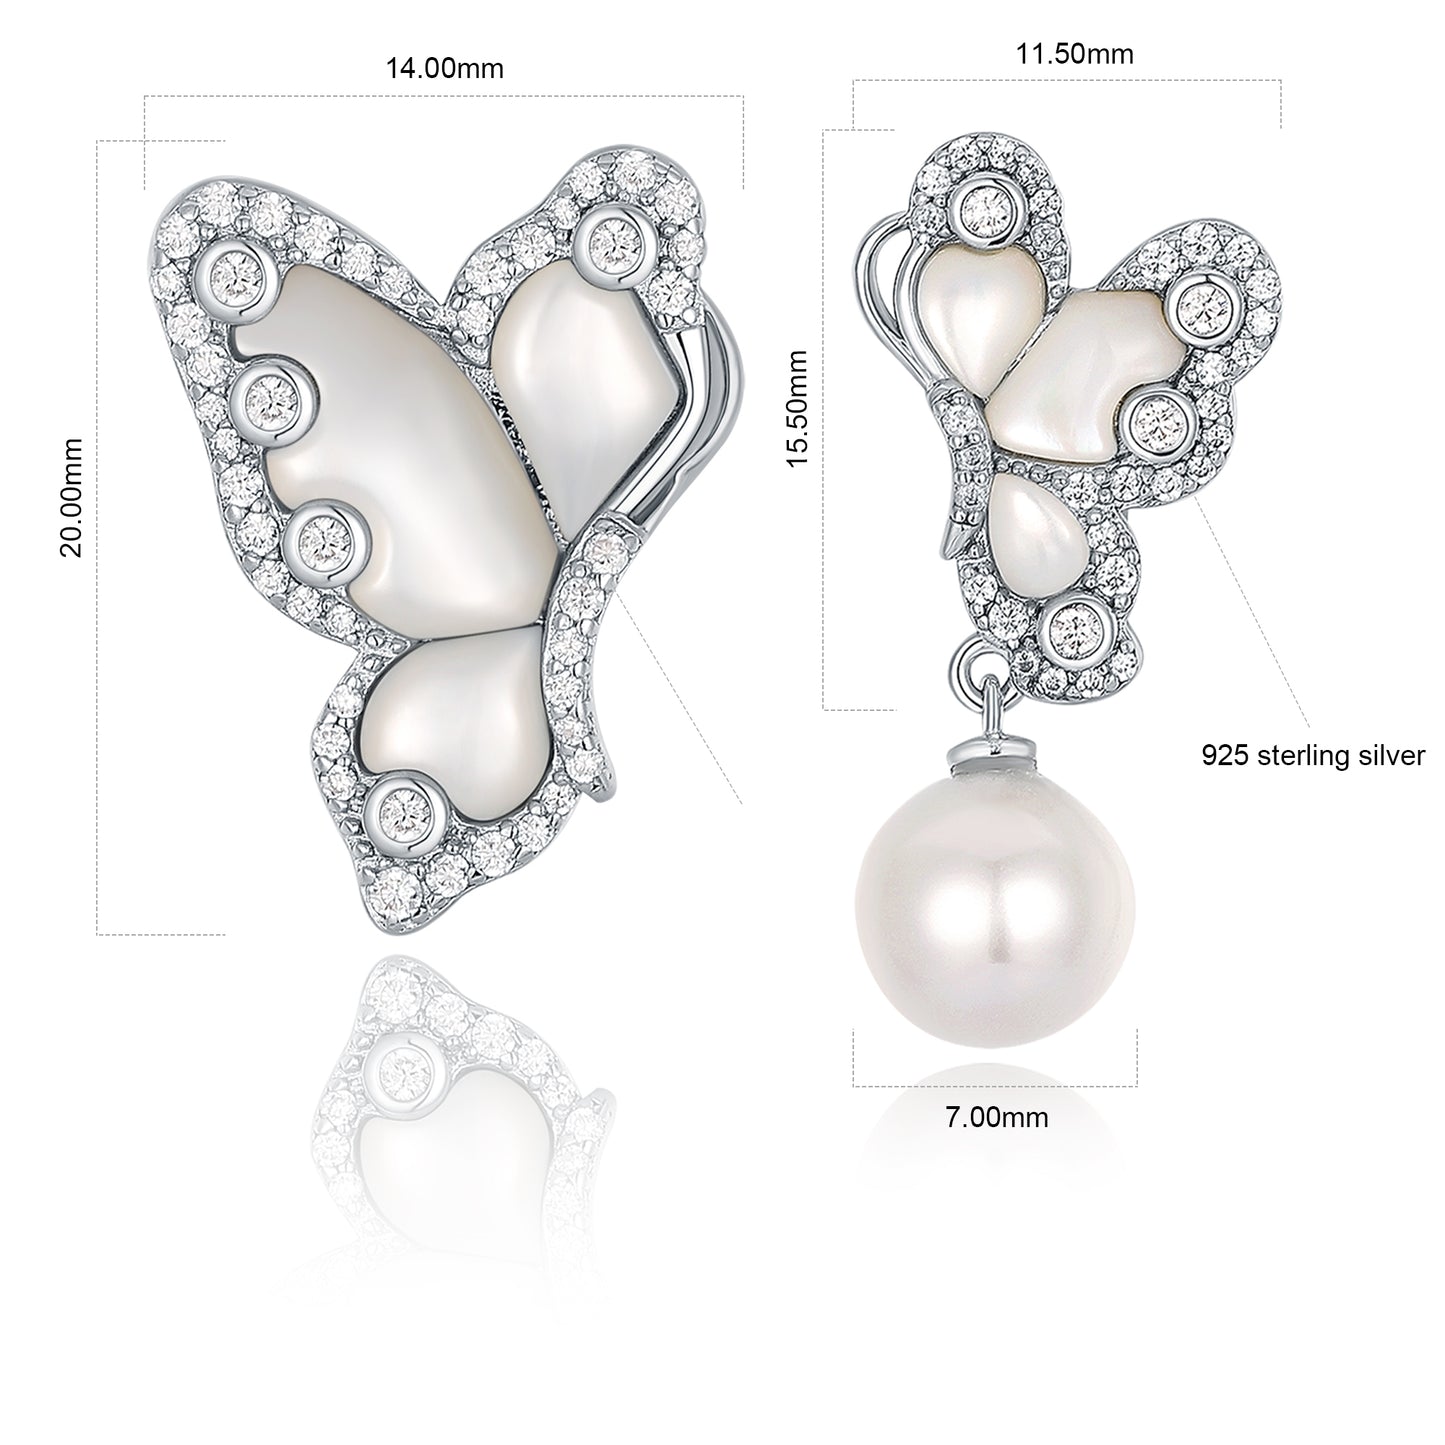 Unique Natural Shell Pearl 7mm Studs Earrings, Sterling Silver Jewelry, Simulated Diamond Earrings